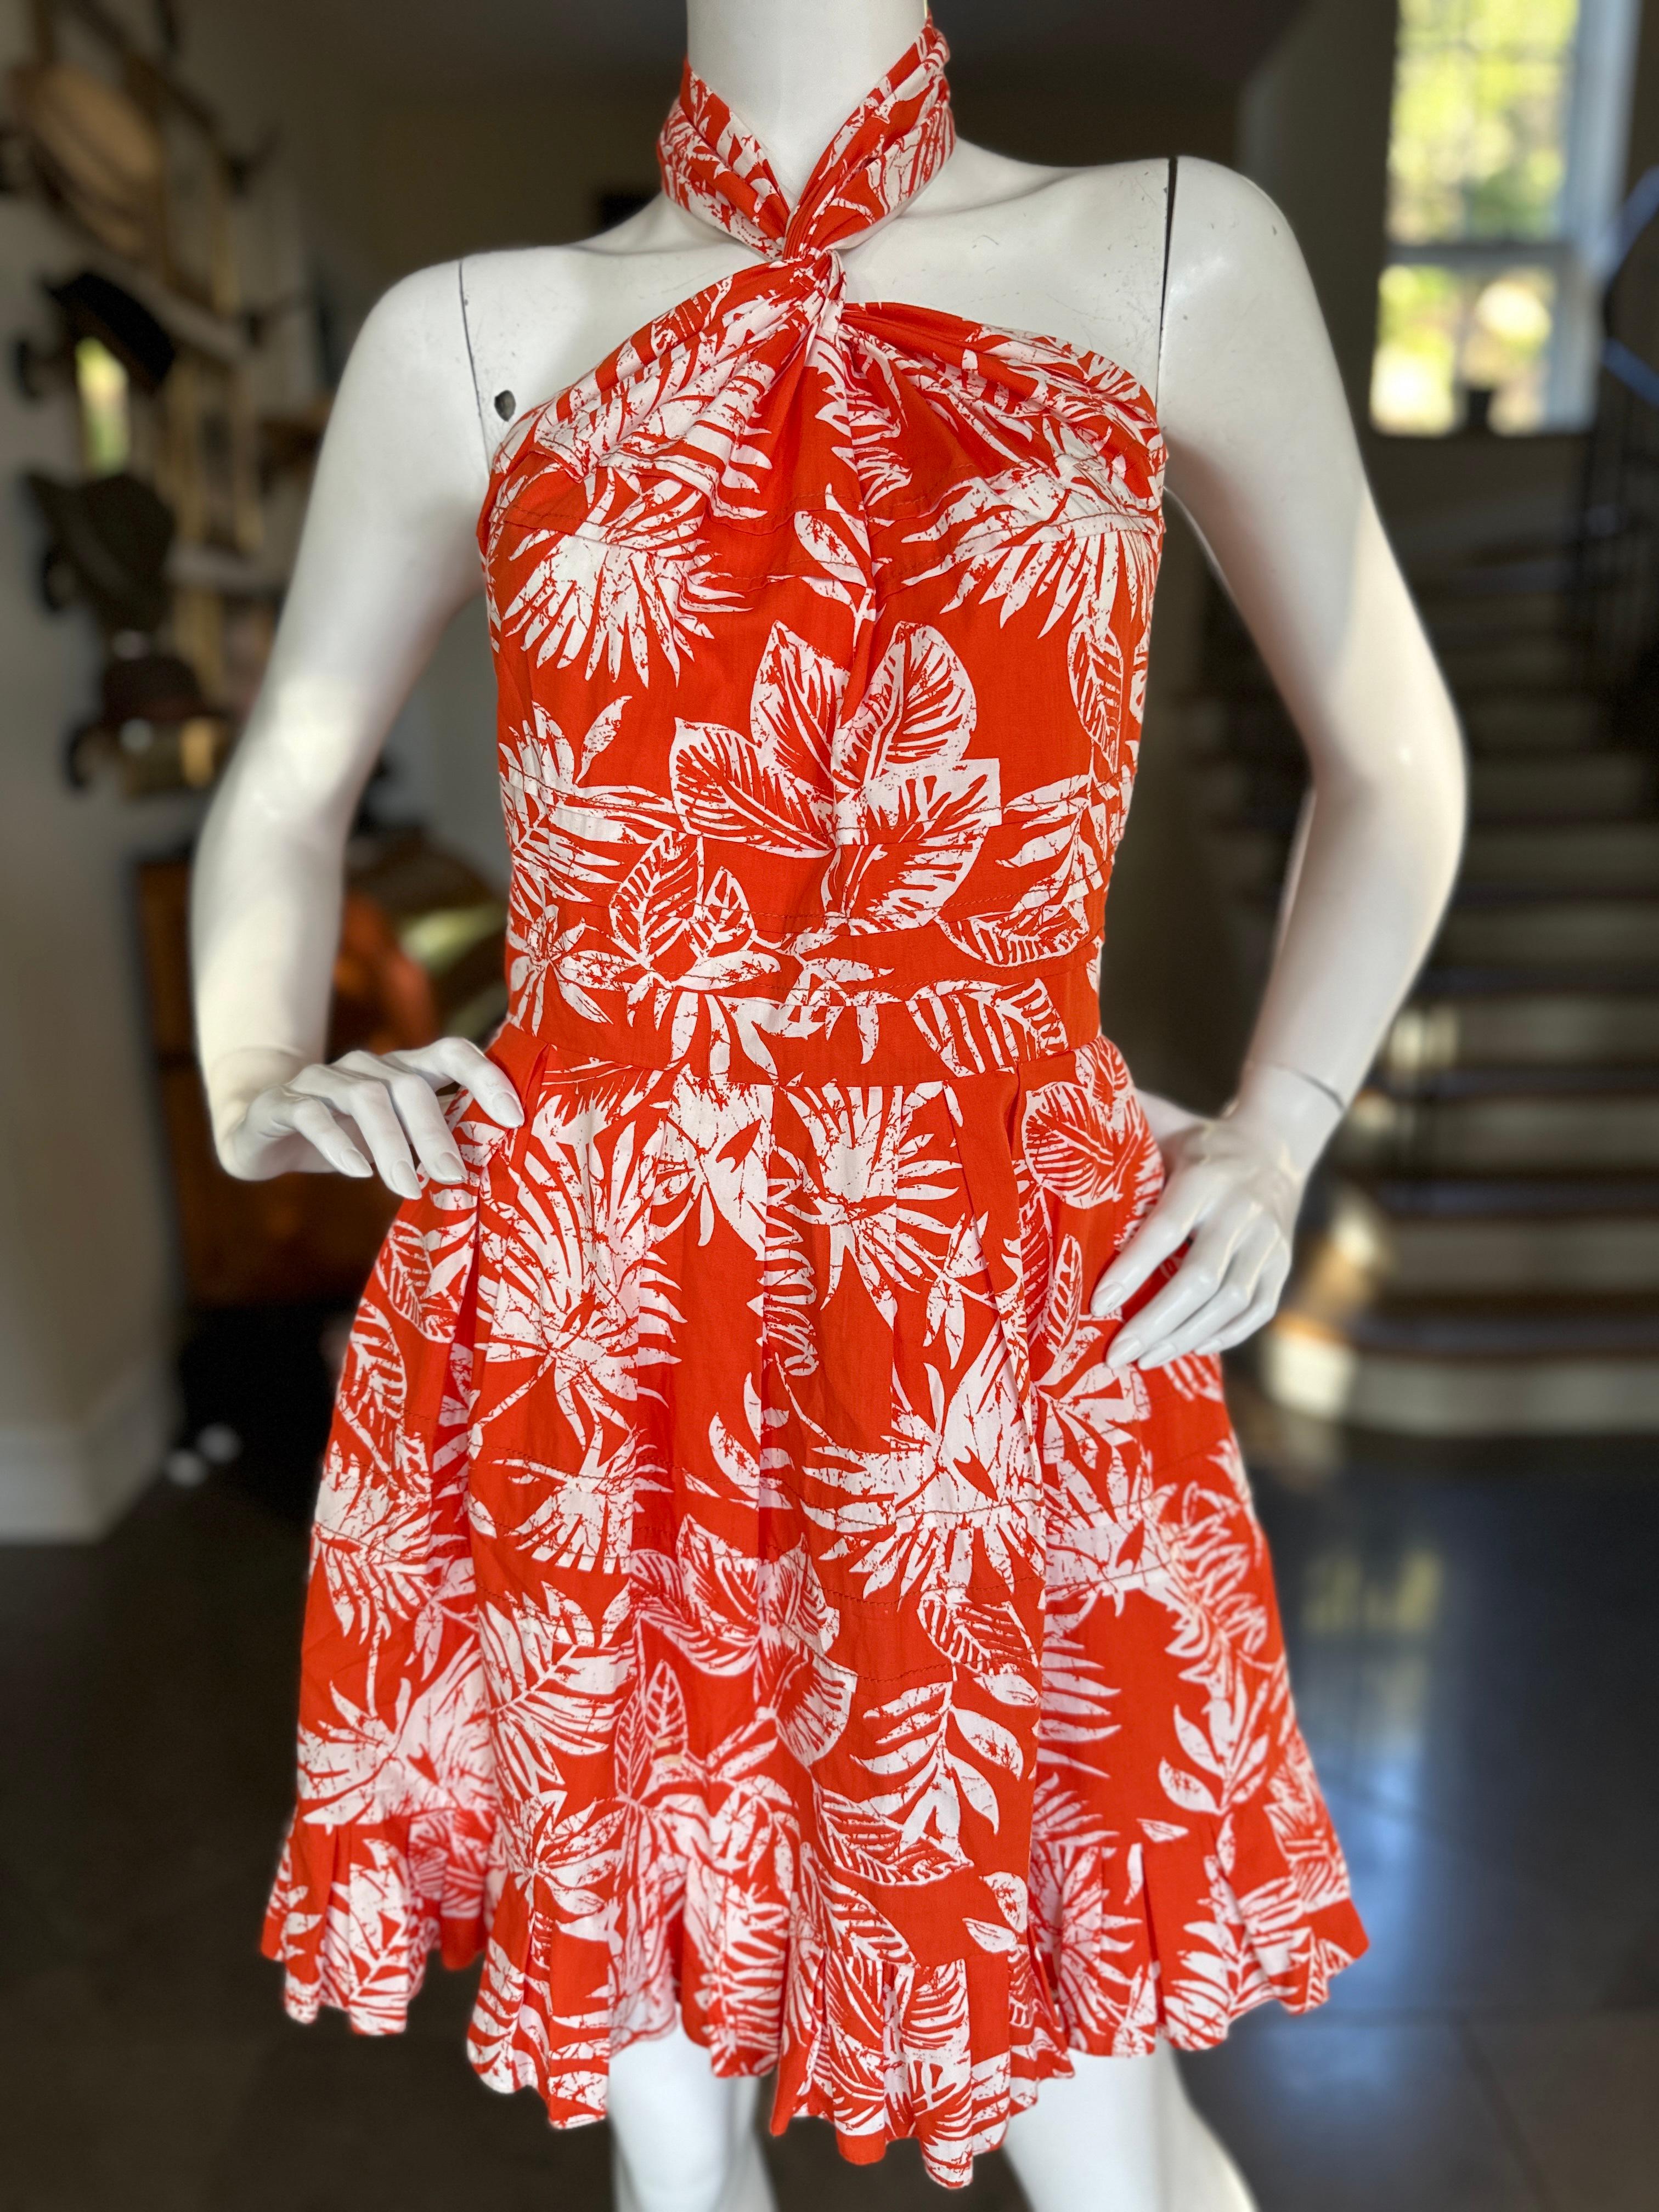 Christian Dior Spring Summer 2011 by John Galliano Cotton Sun Dress In Excellent Condition For Sale In Cloverdale, CA